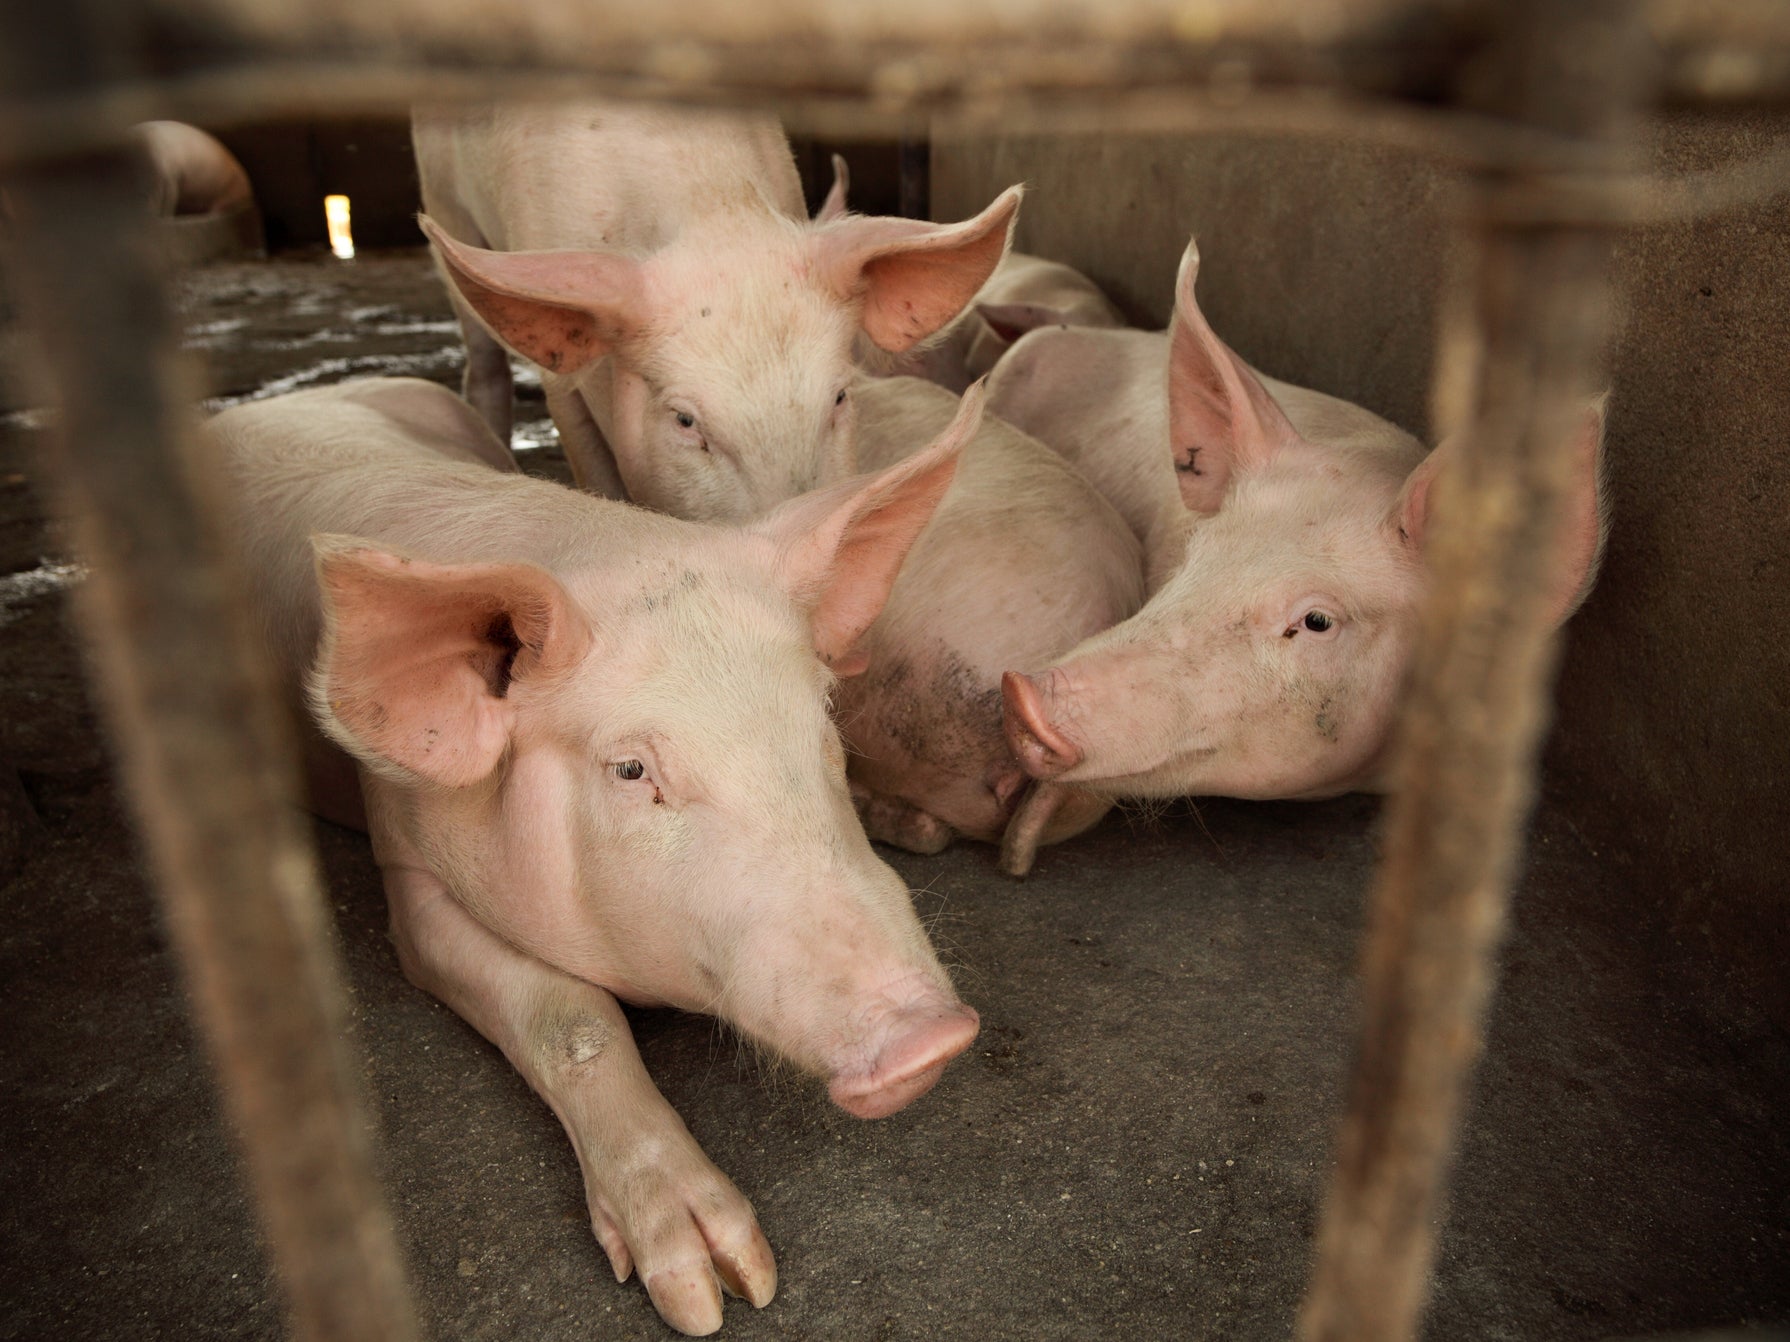 African Swine Fever is deadly to around 100 per cent of pigs